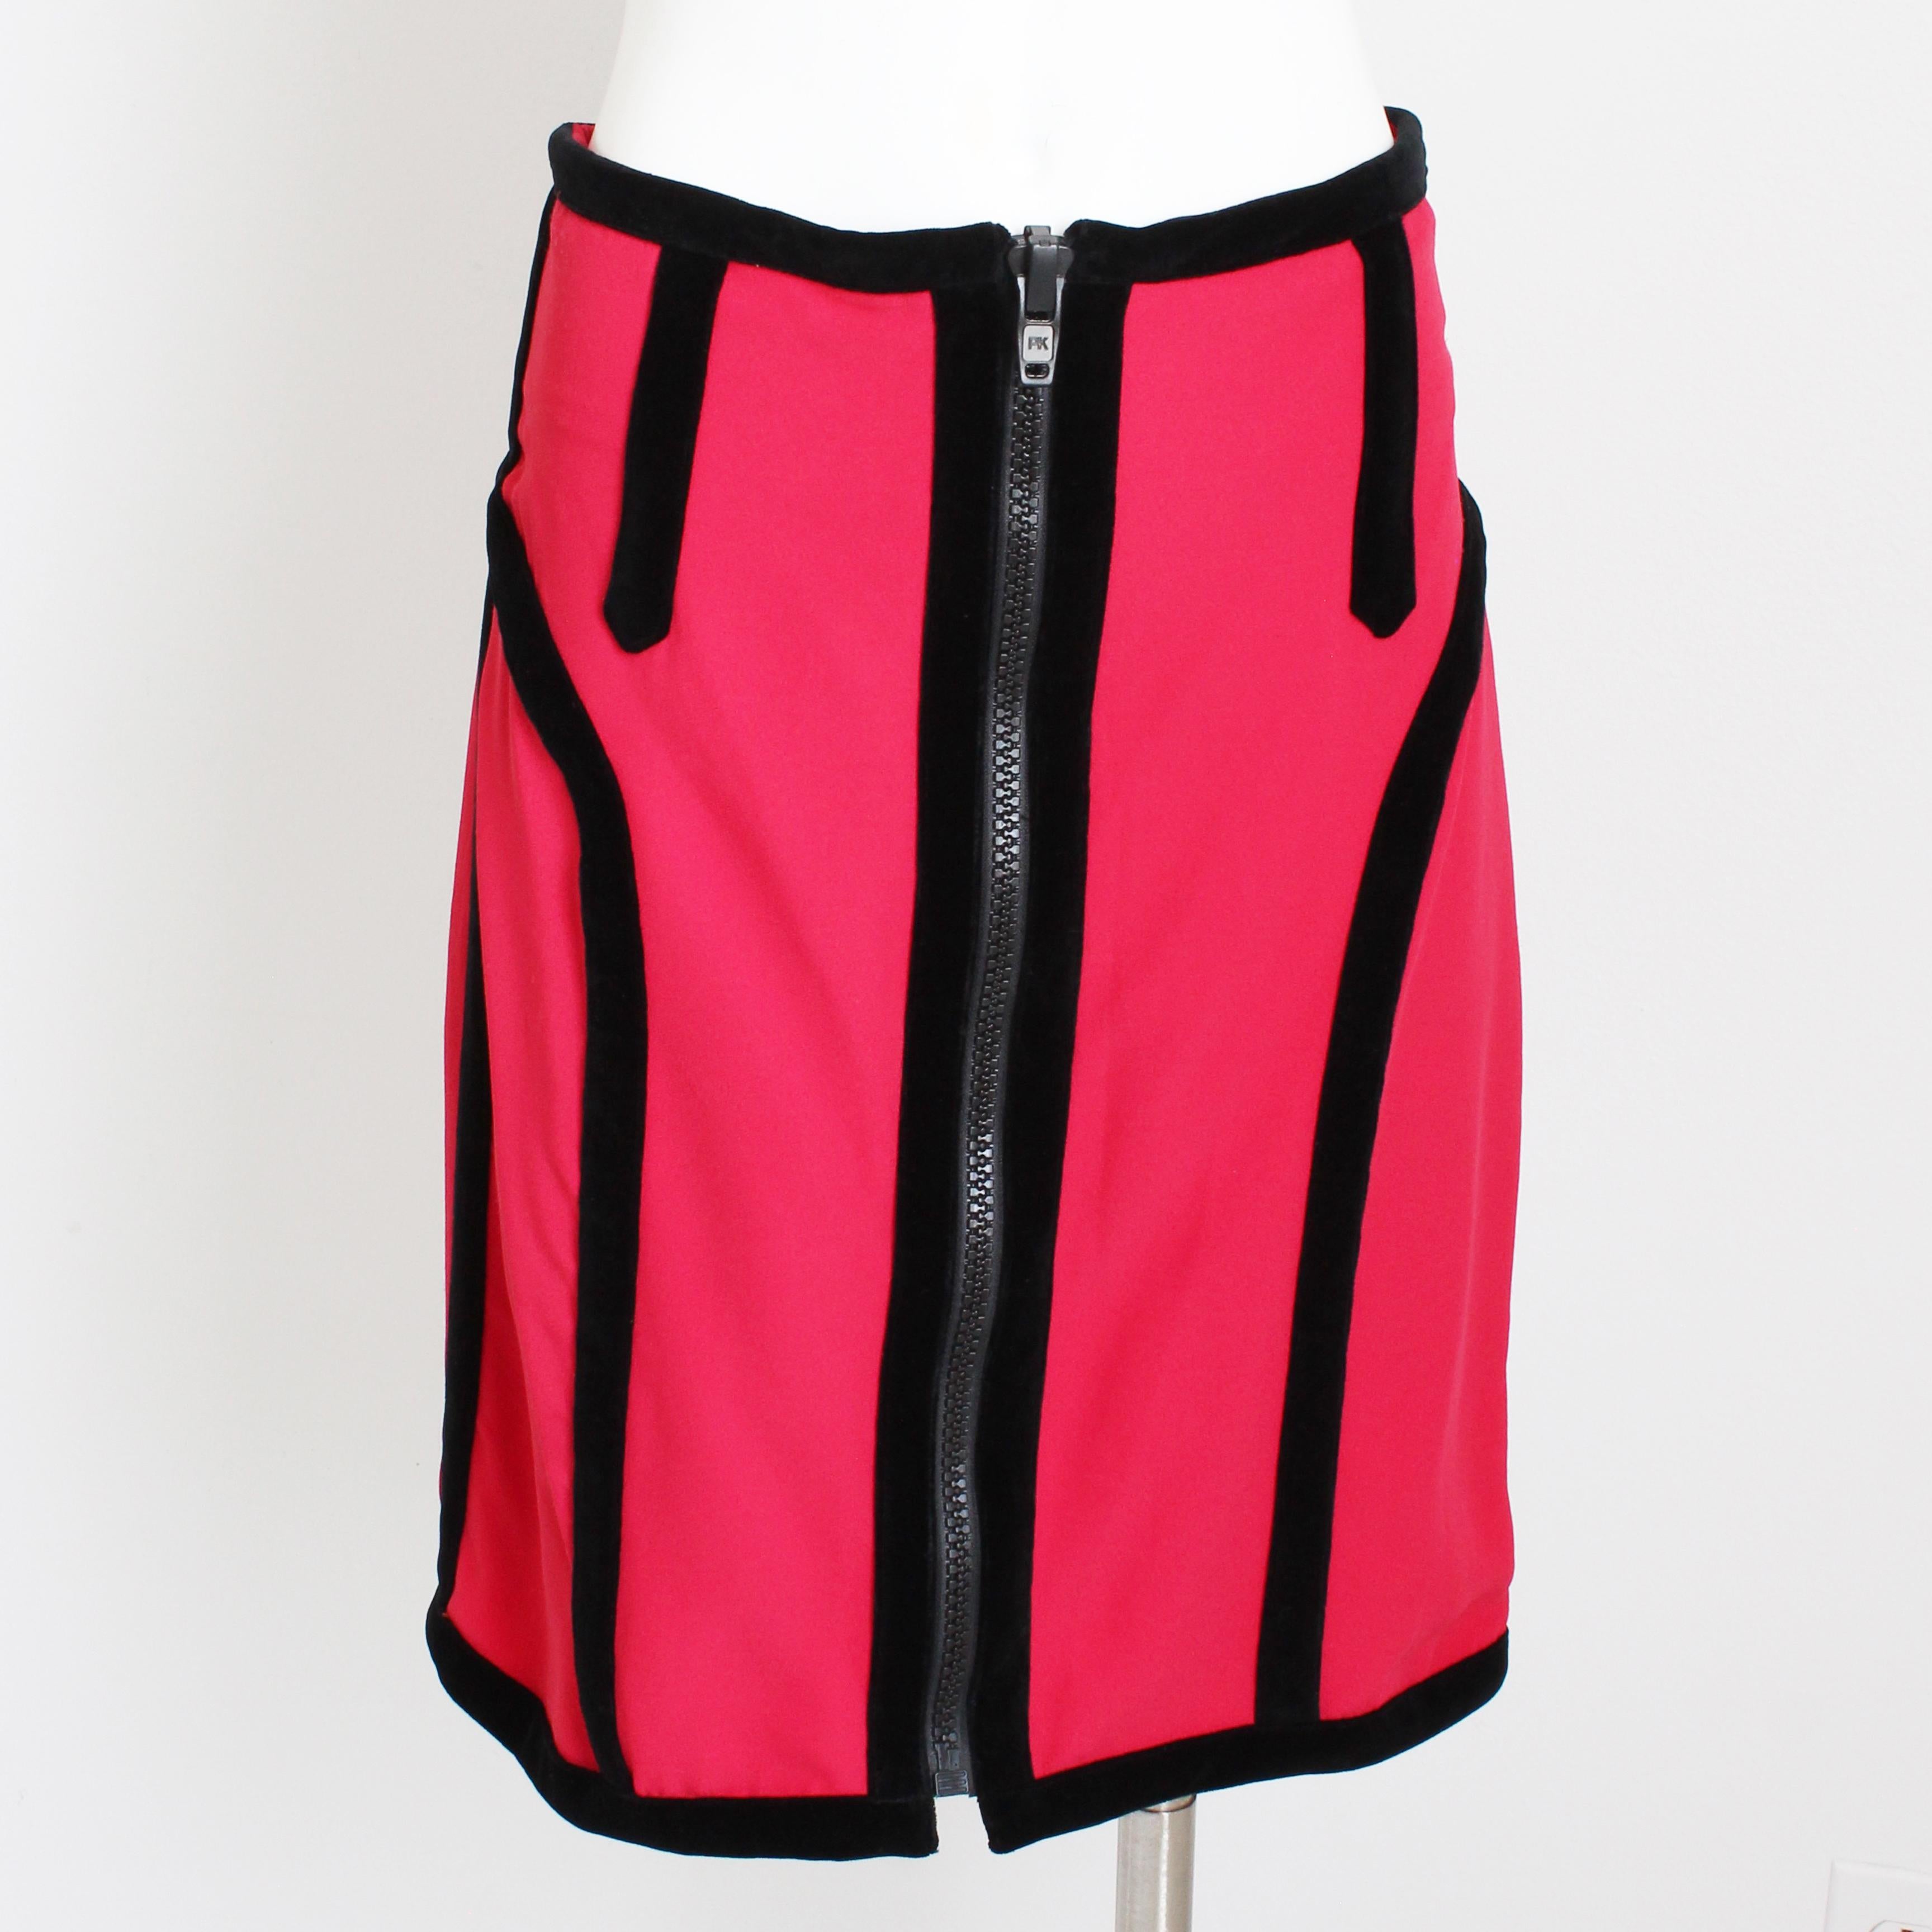 Preowned, vintage Moschino Cheap and Chic mini skirt, likely made in the early 90s. As seen on Fran Drescher in the TV series 